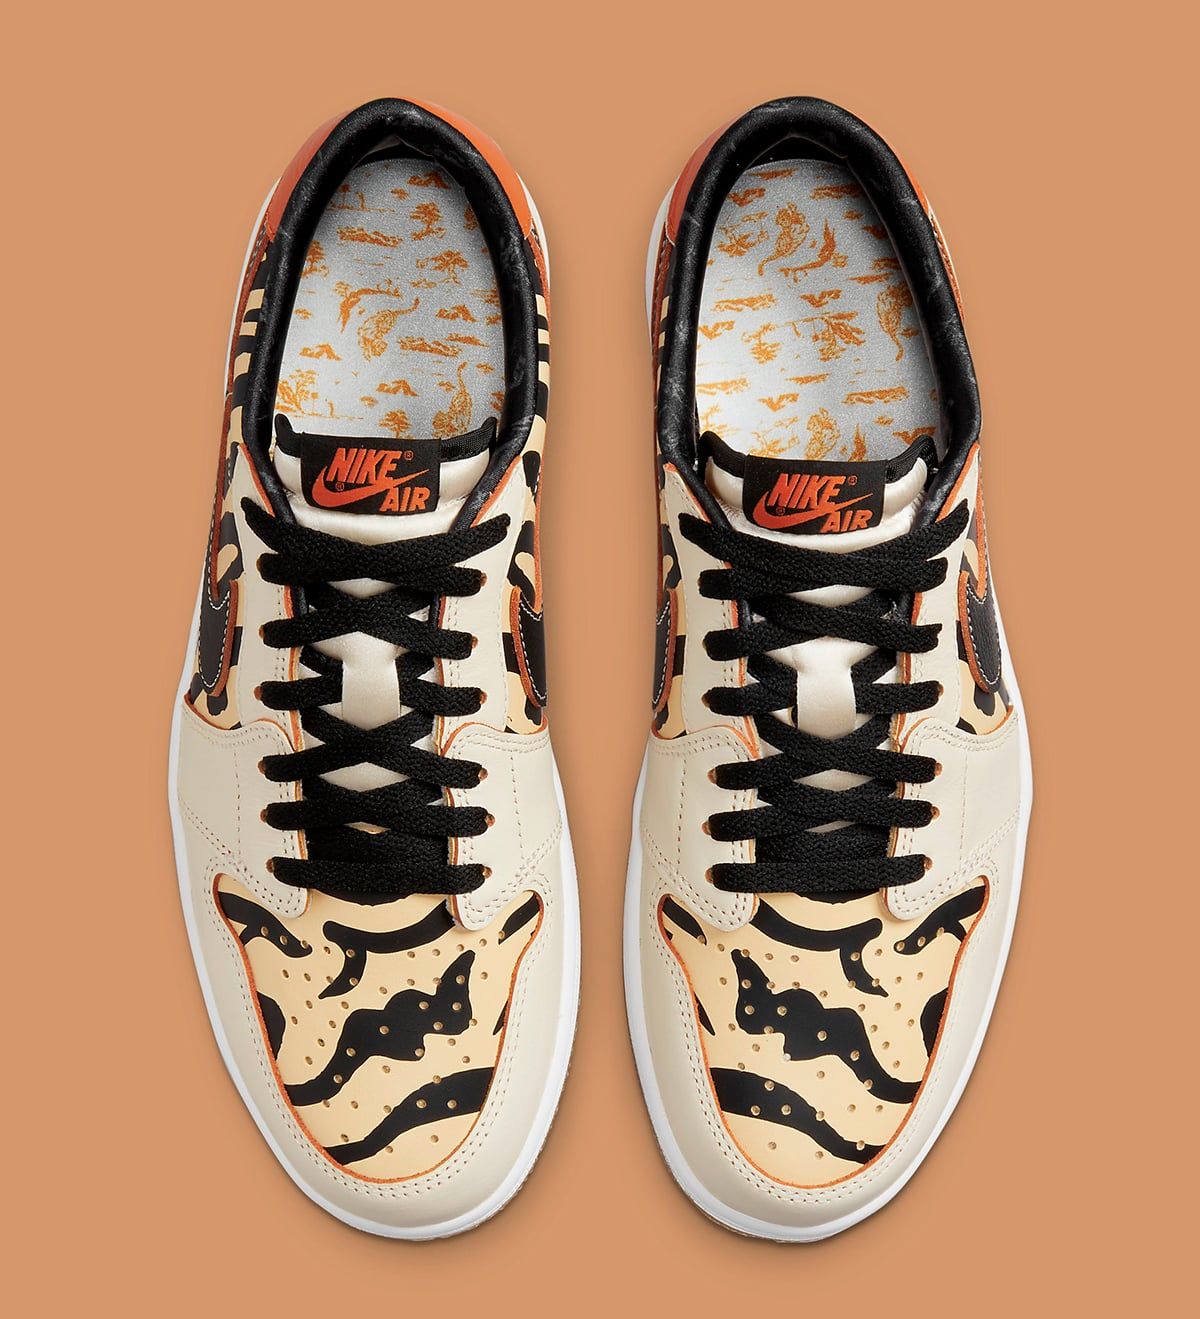 Official Images // Air XII Jordan 1 Low OG CNY “Year of the Tiger 